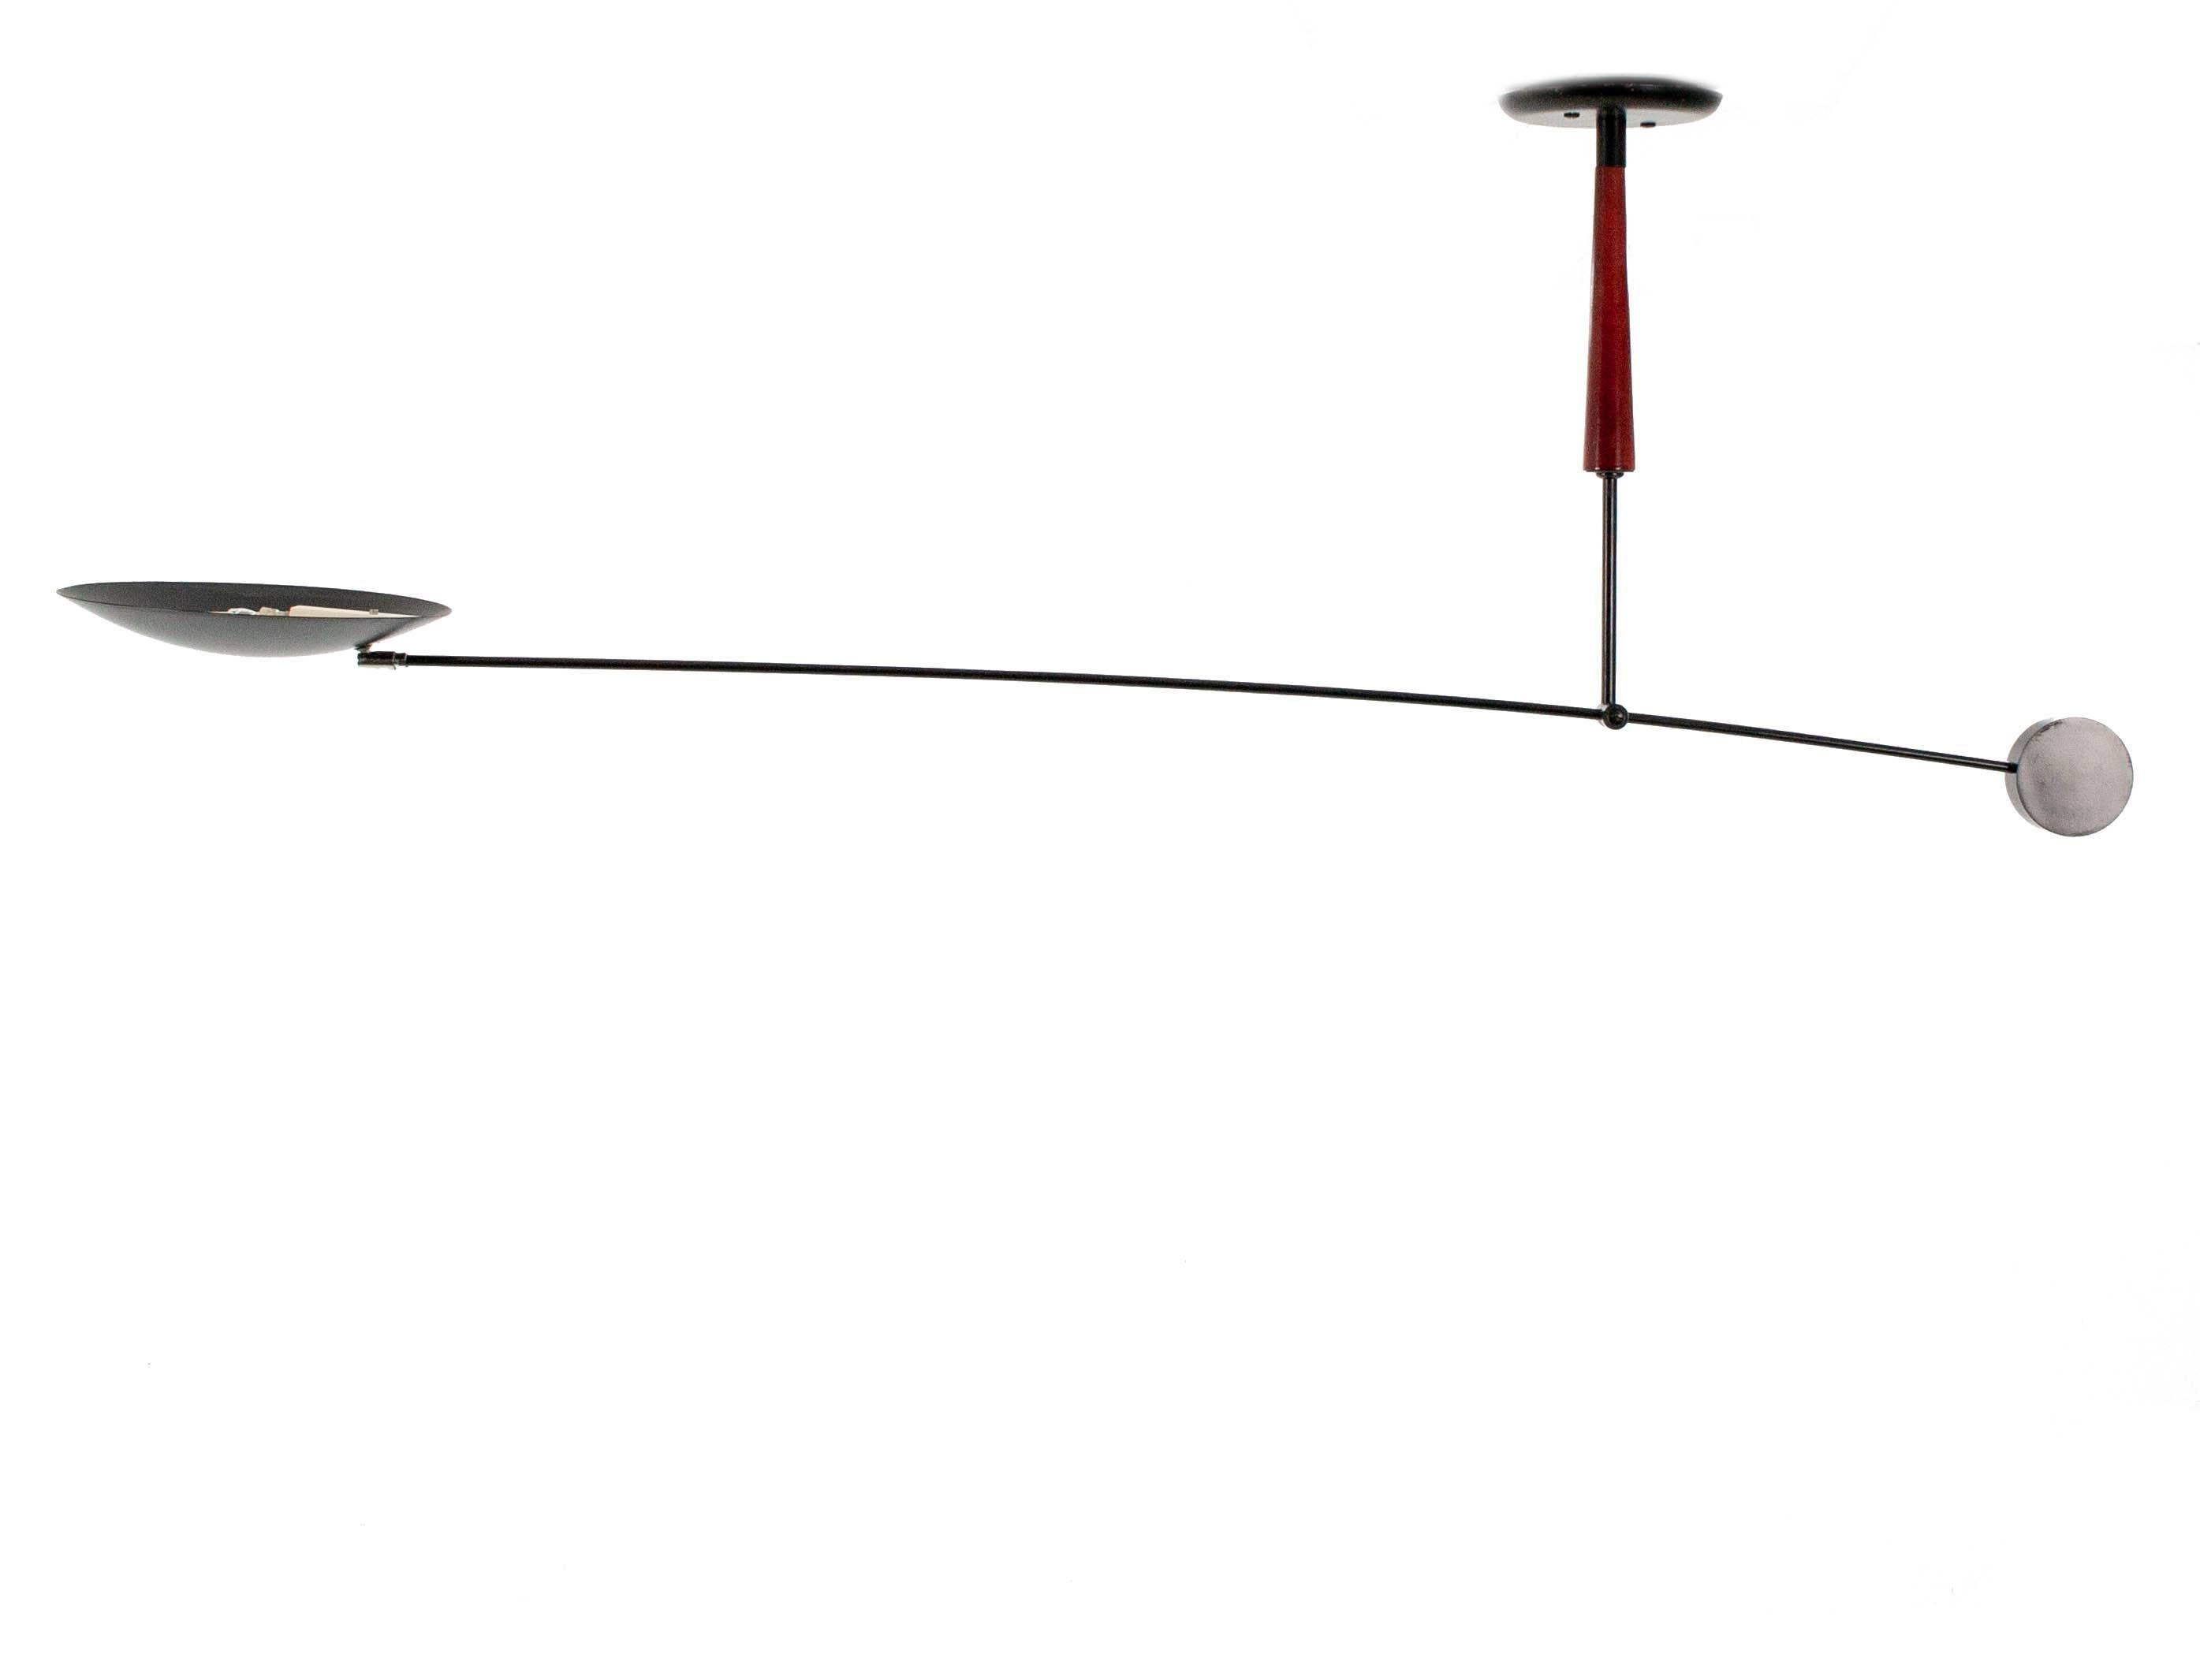 Very large counterbalanced ceiling mounted swingarm halogen lamp and flagship of Dutch lighting specialists Herda's 1980s 'Balance' series of swingarm lamps. With a span of nearly 1.50 meters and three points of articulation this highly impressive